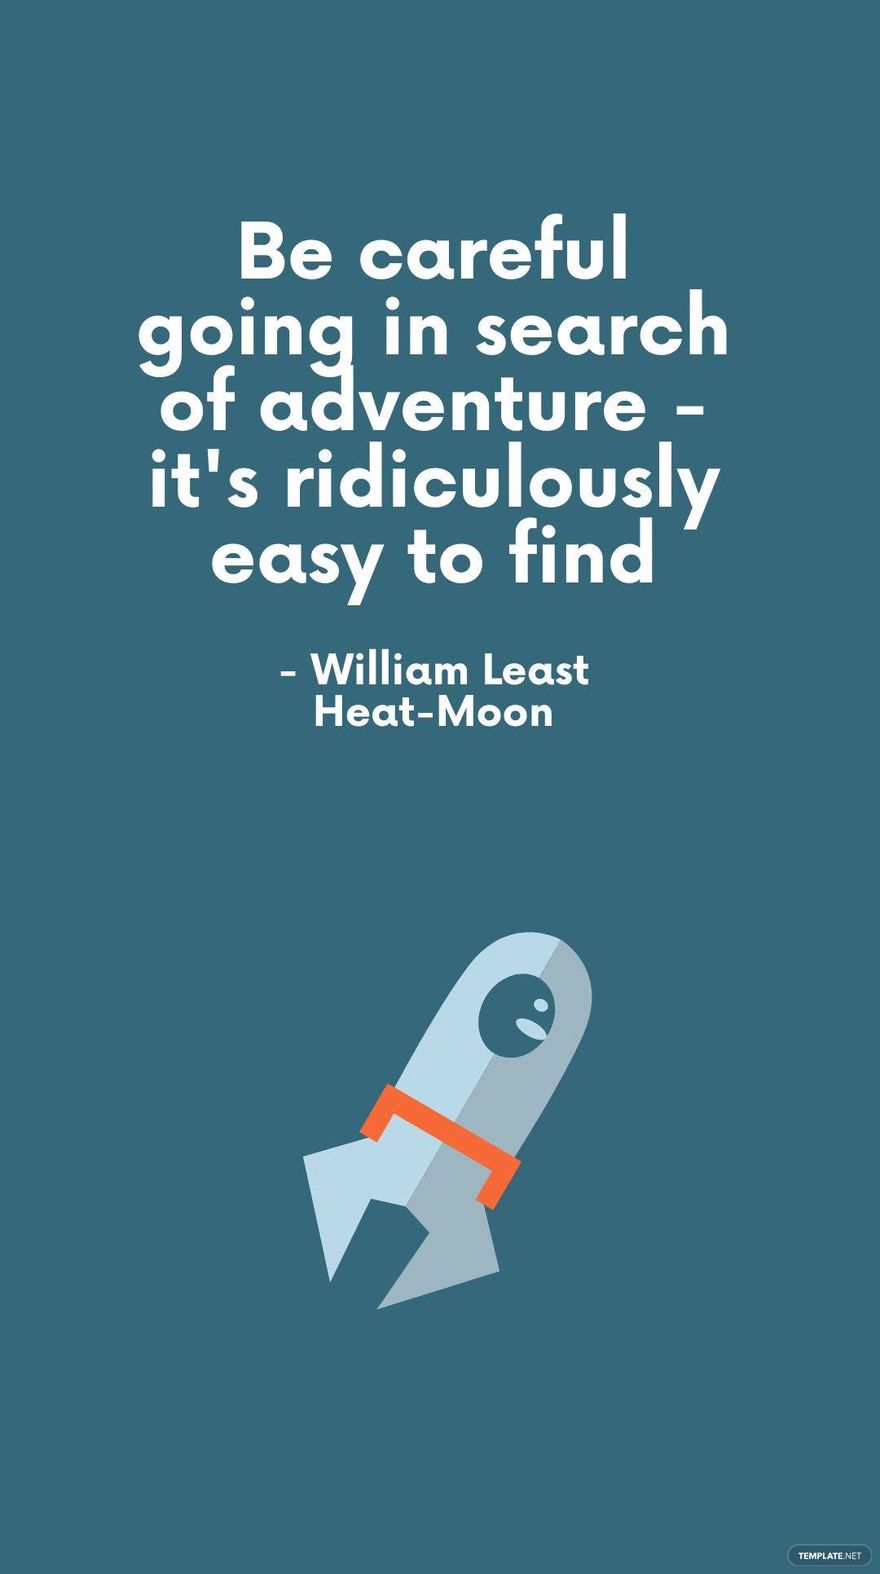 Free William Least Heat-Moon - Be careful going in search of adventure - it's ridiculously easy to find